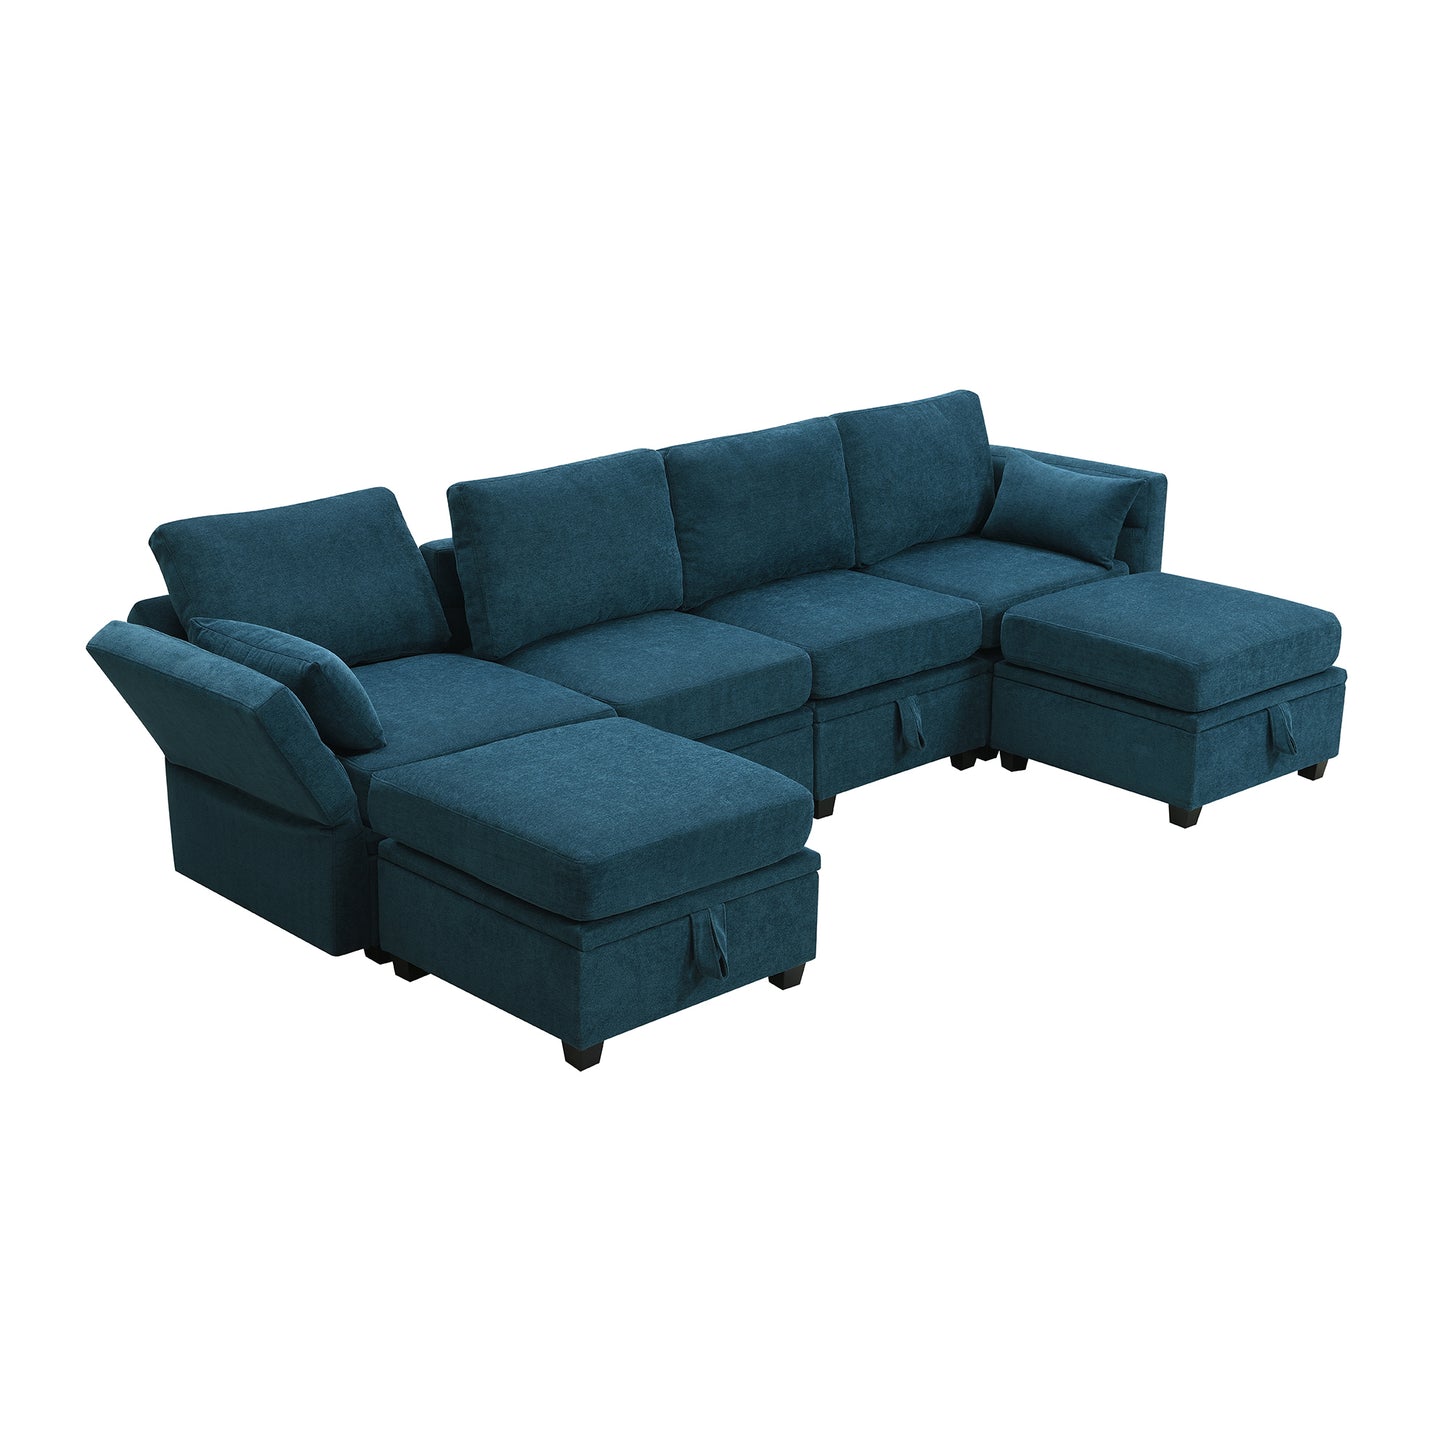 Chenille U-Shaped Modular Sectional Sofa with Adjustable Armrests, Backrests, and Storage Seats